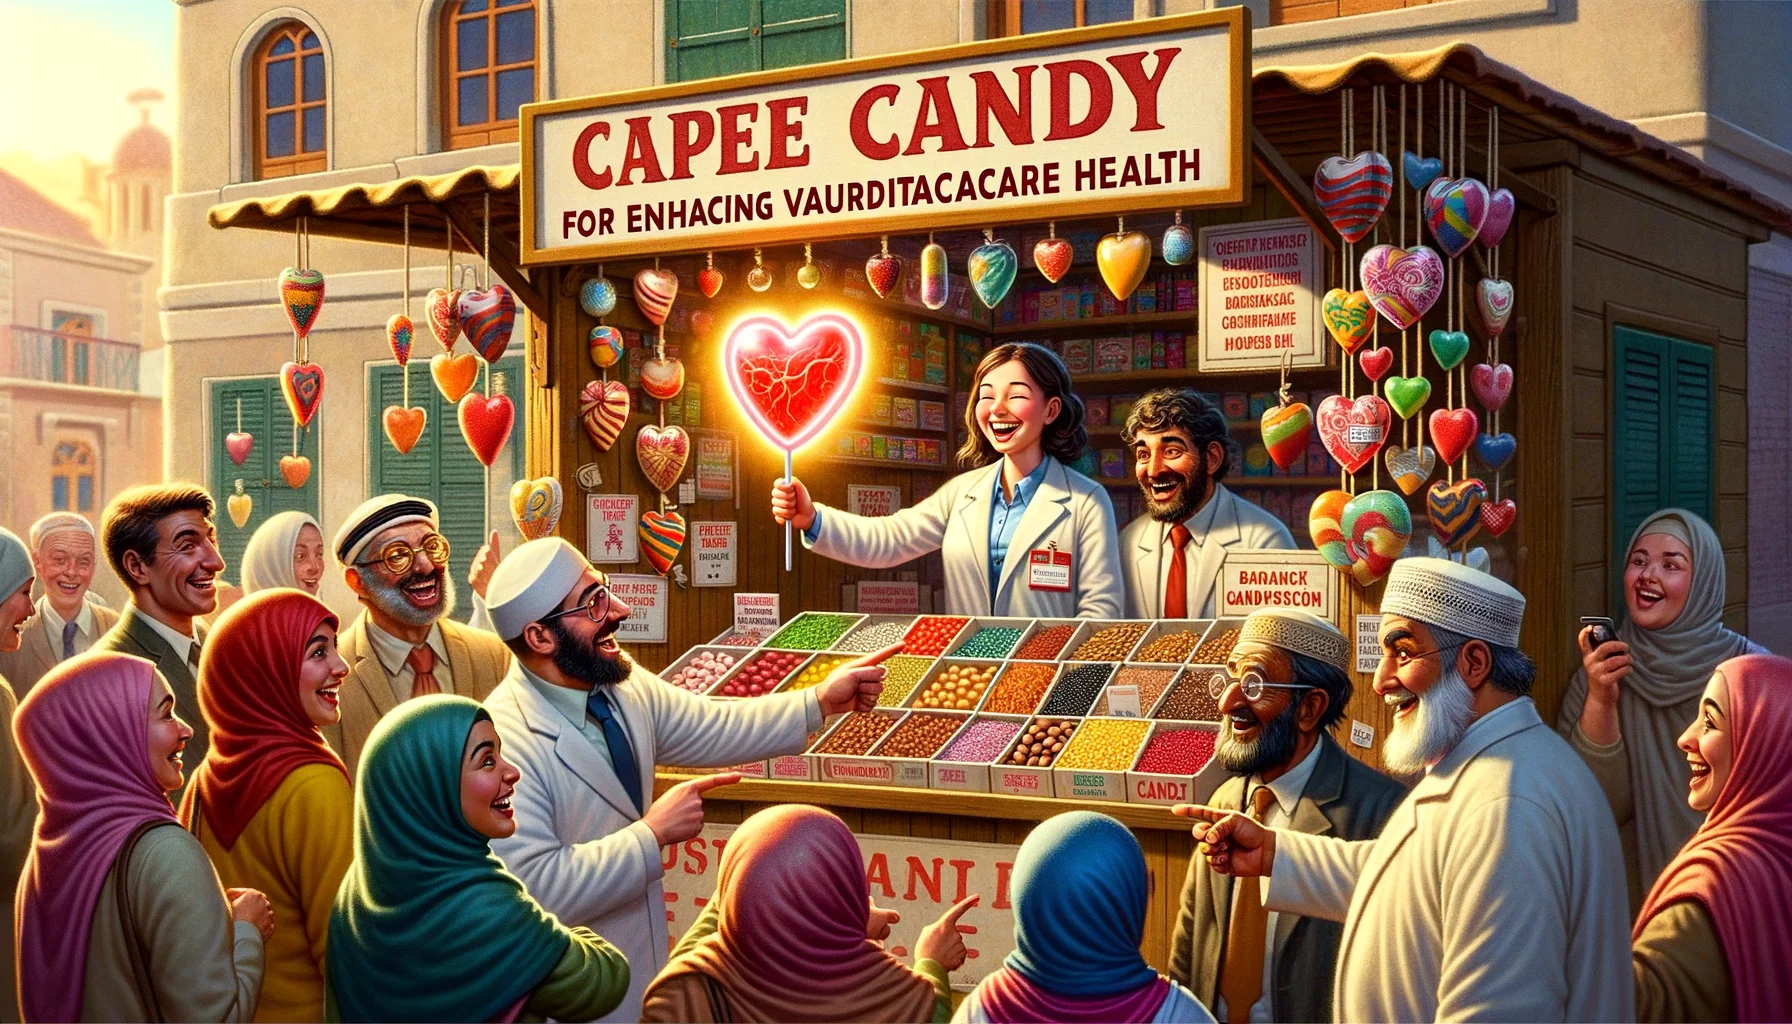 An amusingly realistic scene depicting a lively street fair stocked with colorful stalls. One special stall catches the eye - a whimsical booth labeled 'Candy for Enhancing Cardiovascular Health'. The booth operator is an enthusiastic Caucasian woman in a lab coat, holding up a luminous heart-shaped lollipop as though it's a miraculous invention. Local visitors of different descents and genders are reacting with various levels of disbelief and amusement. From a Middle-Eastern man chuckling heartily to a young South Asian girl pointing excitedly at the lollipop, the jovial atmosphere is contagious.